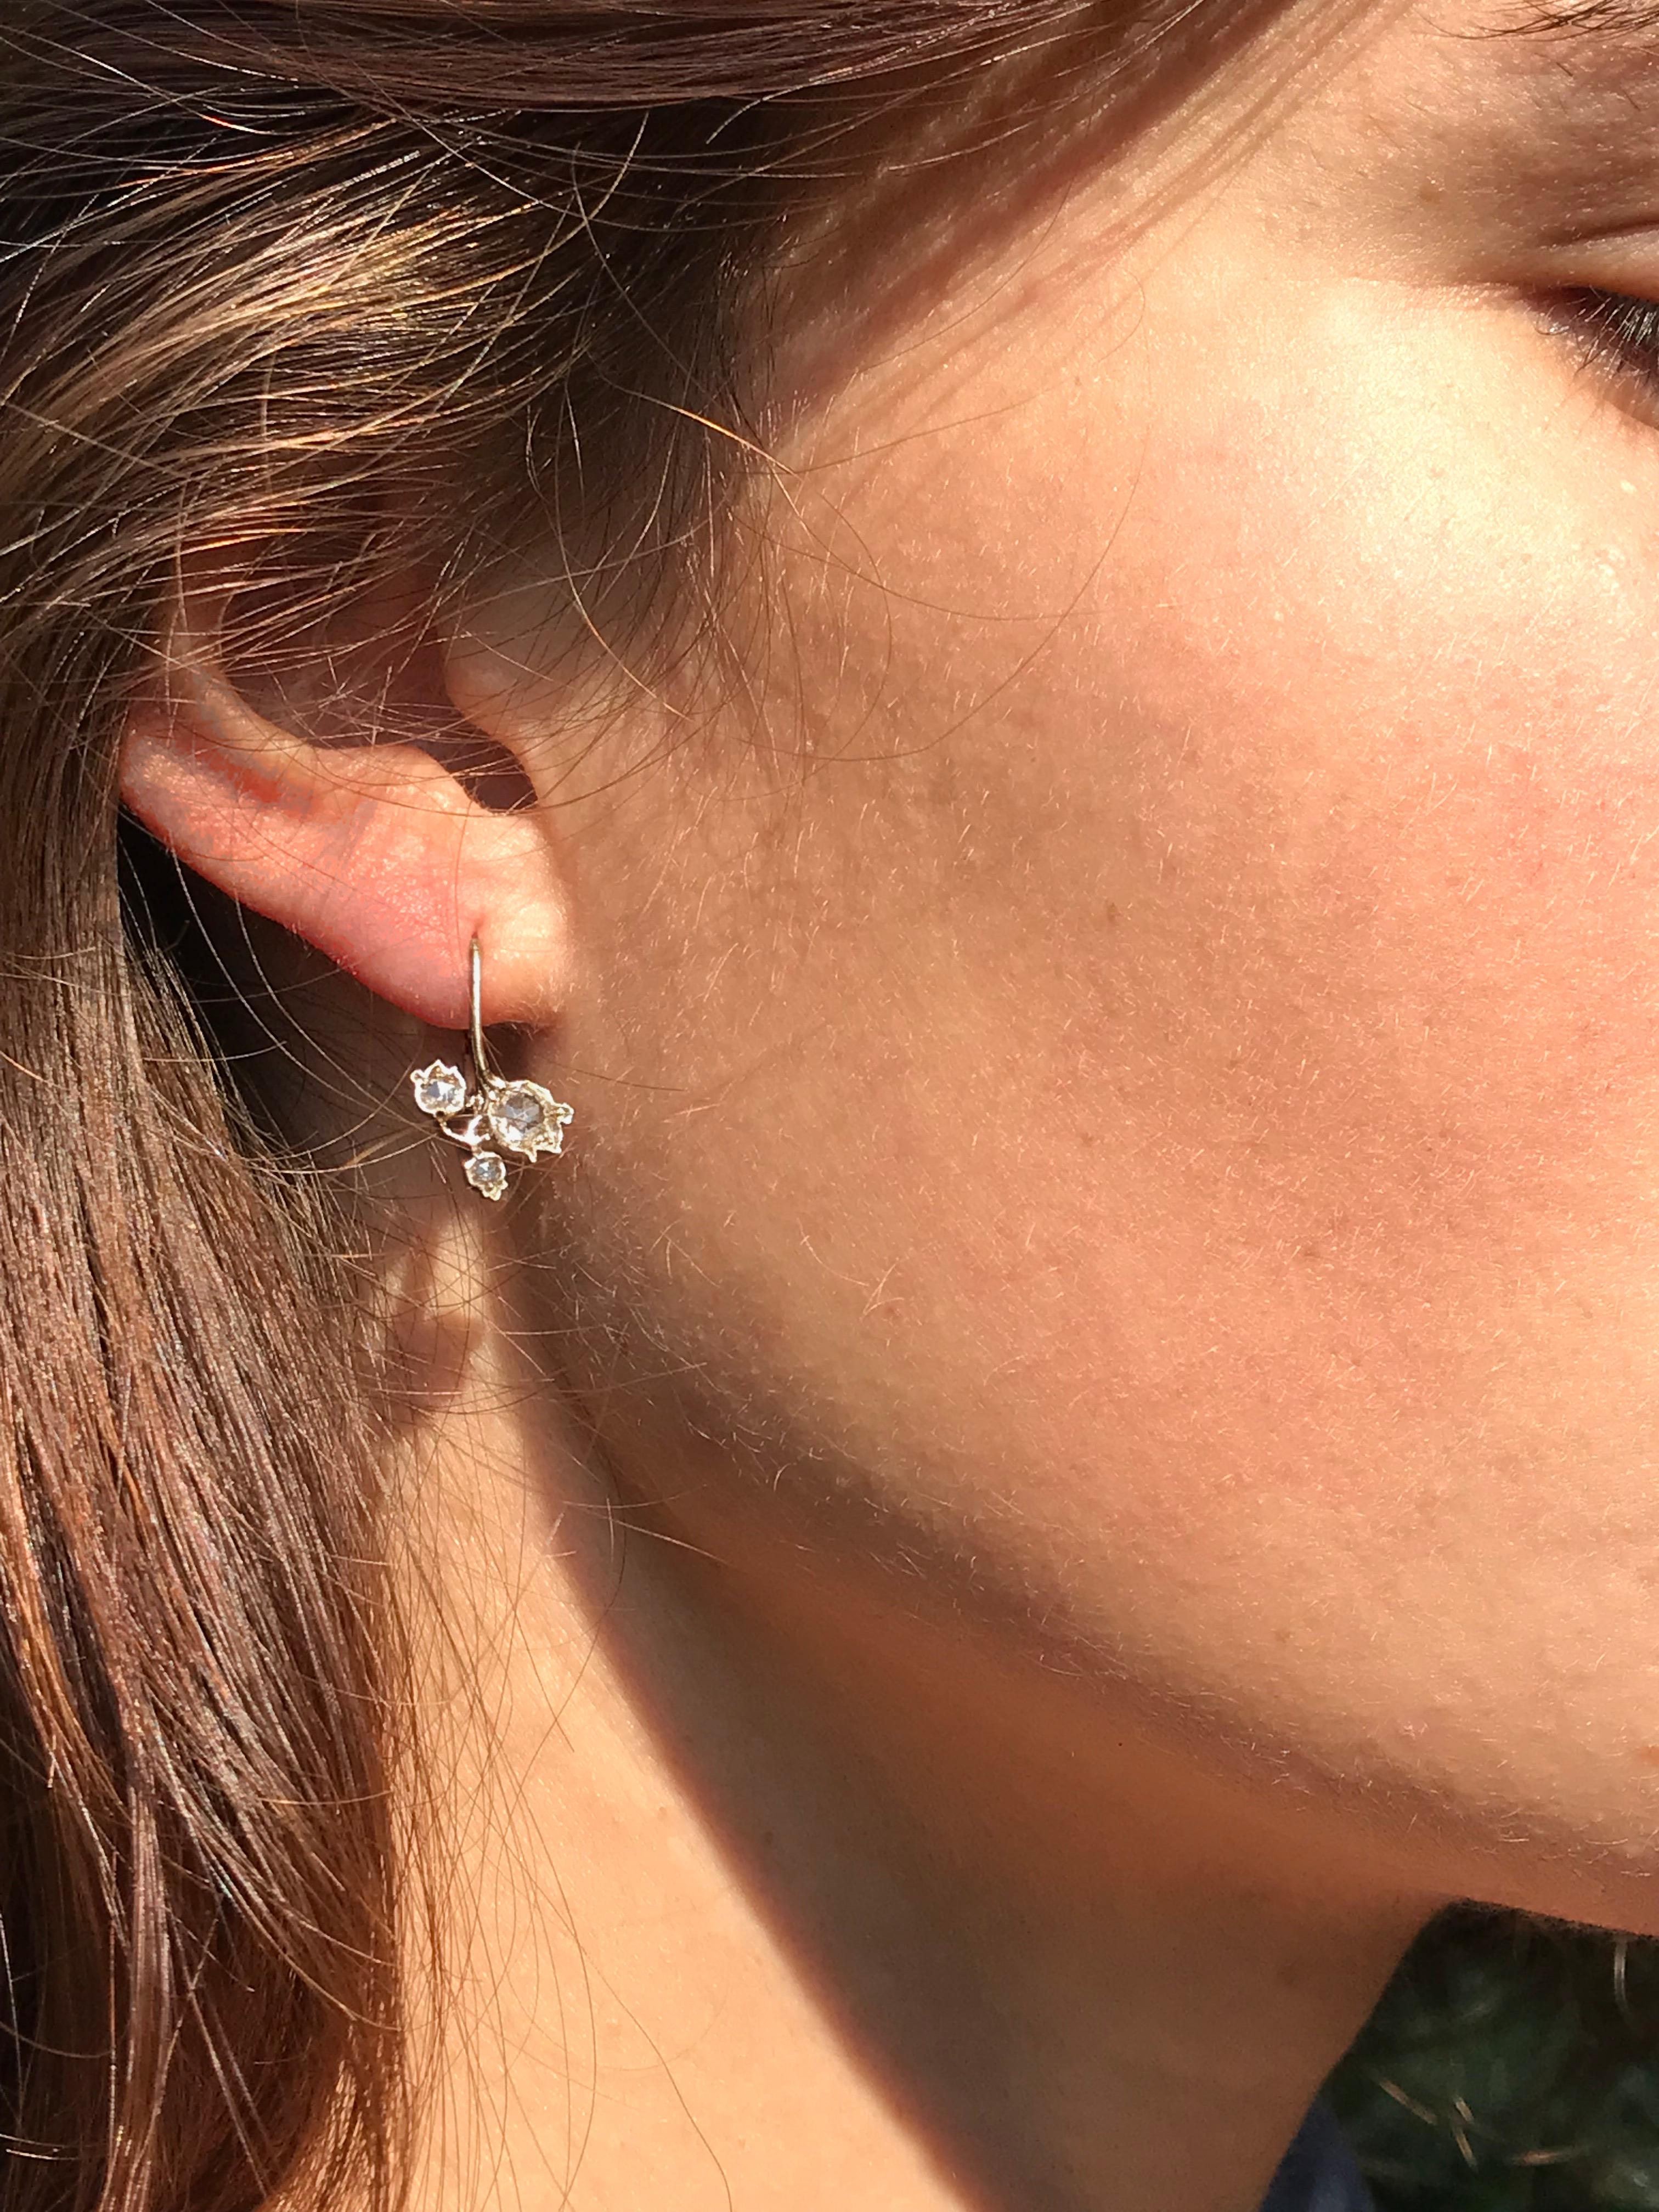 Dalben design diamond floral drop earrings mounted in 18 kt white gold with 6 white rose cut diamonds total weight 0,47 carat.
Earrings dimension:
max width 10 mm ,
height without leverback 9 mm
height with leverback 17 mm
The Earrings are